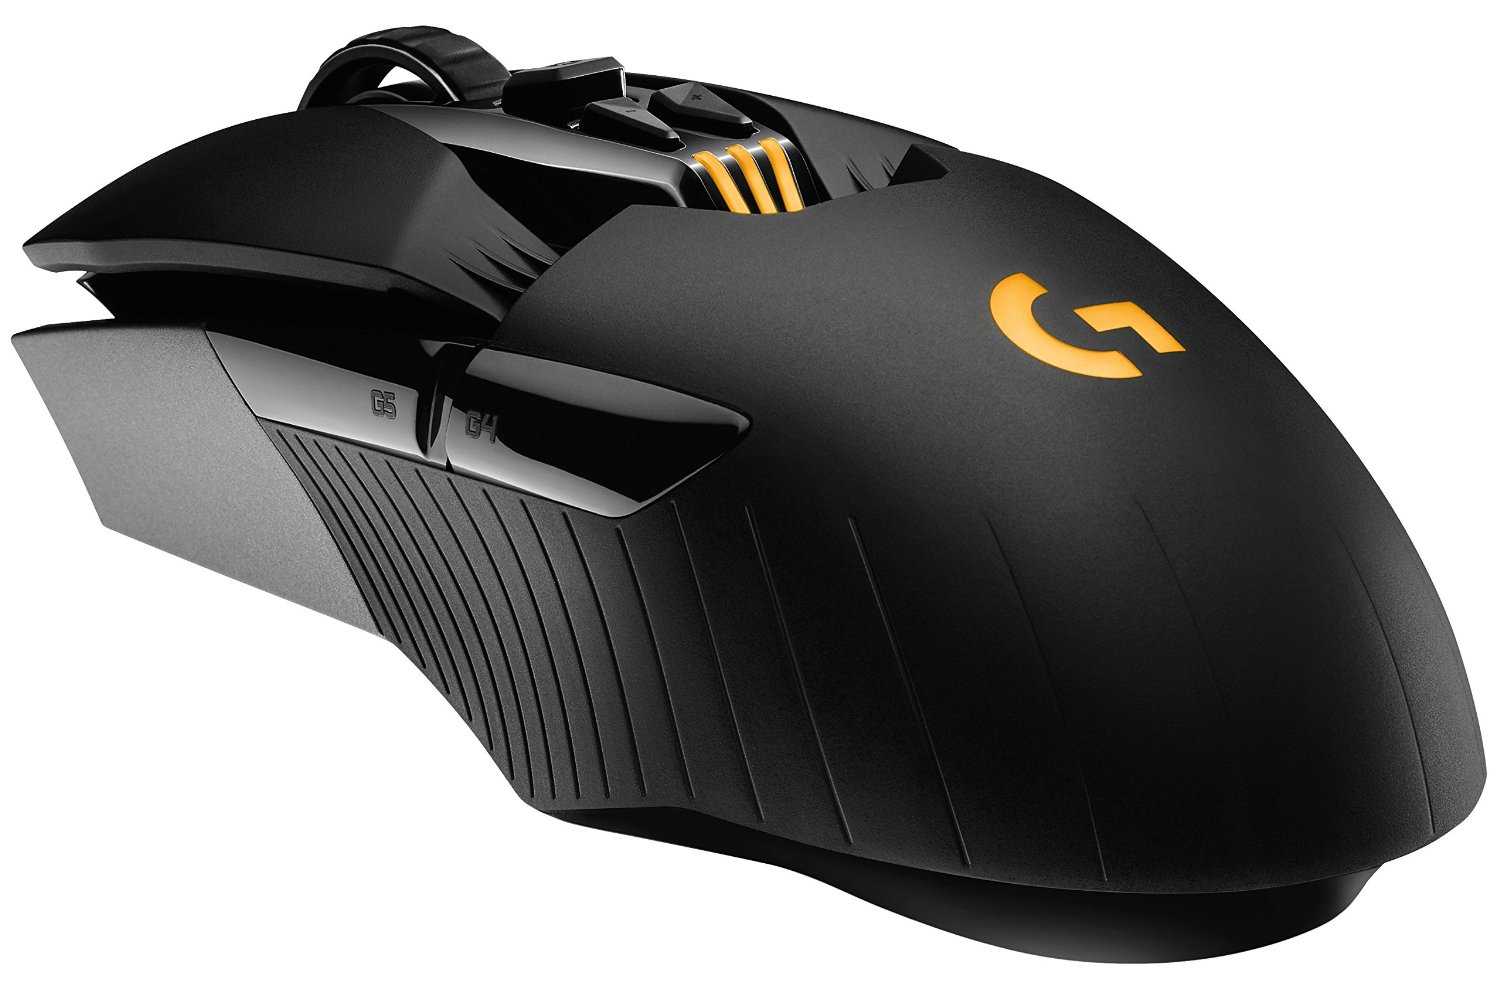 Best Gaming Mouse Review 2020 - Buyer's guide